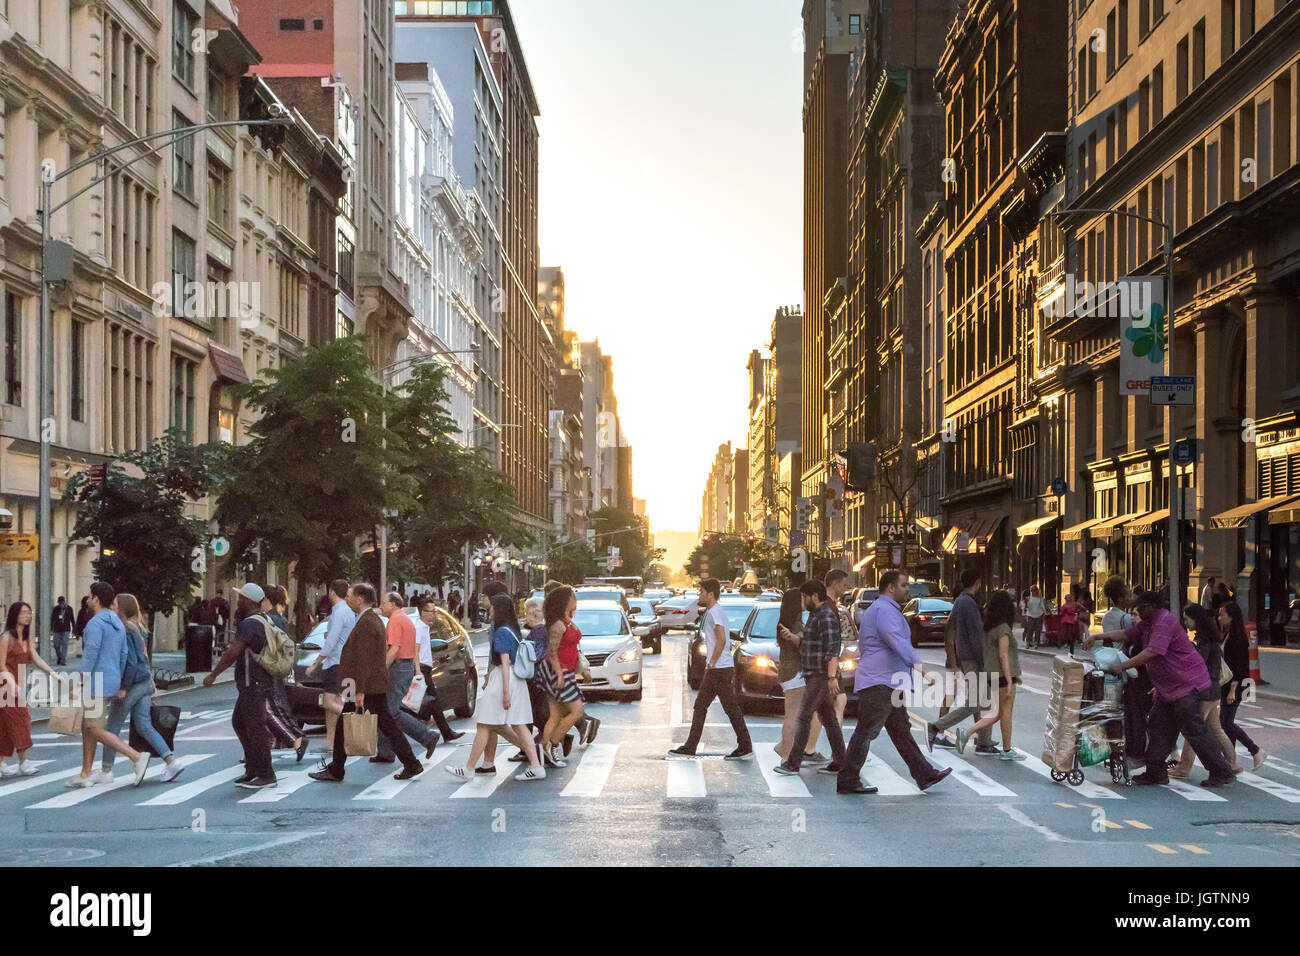 NEW YORK CITY - CIRCA 2017: Busy crowds of people cross the intersection of 5th Avenue and 23rd Street in Manhattan, New York City with the colorful s Stock Photo